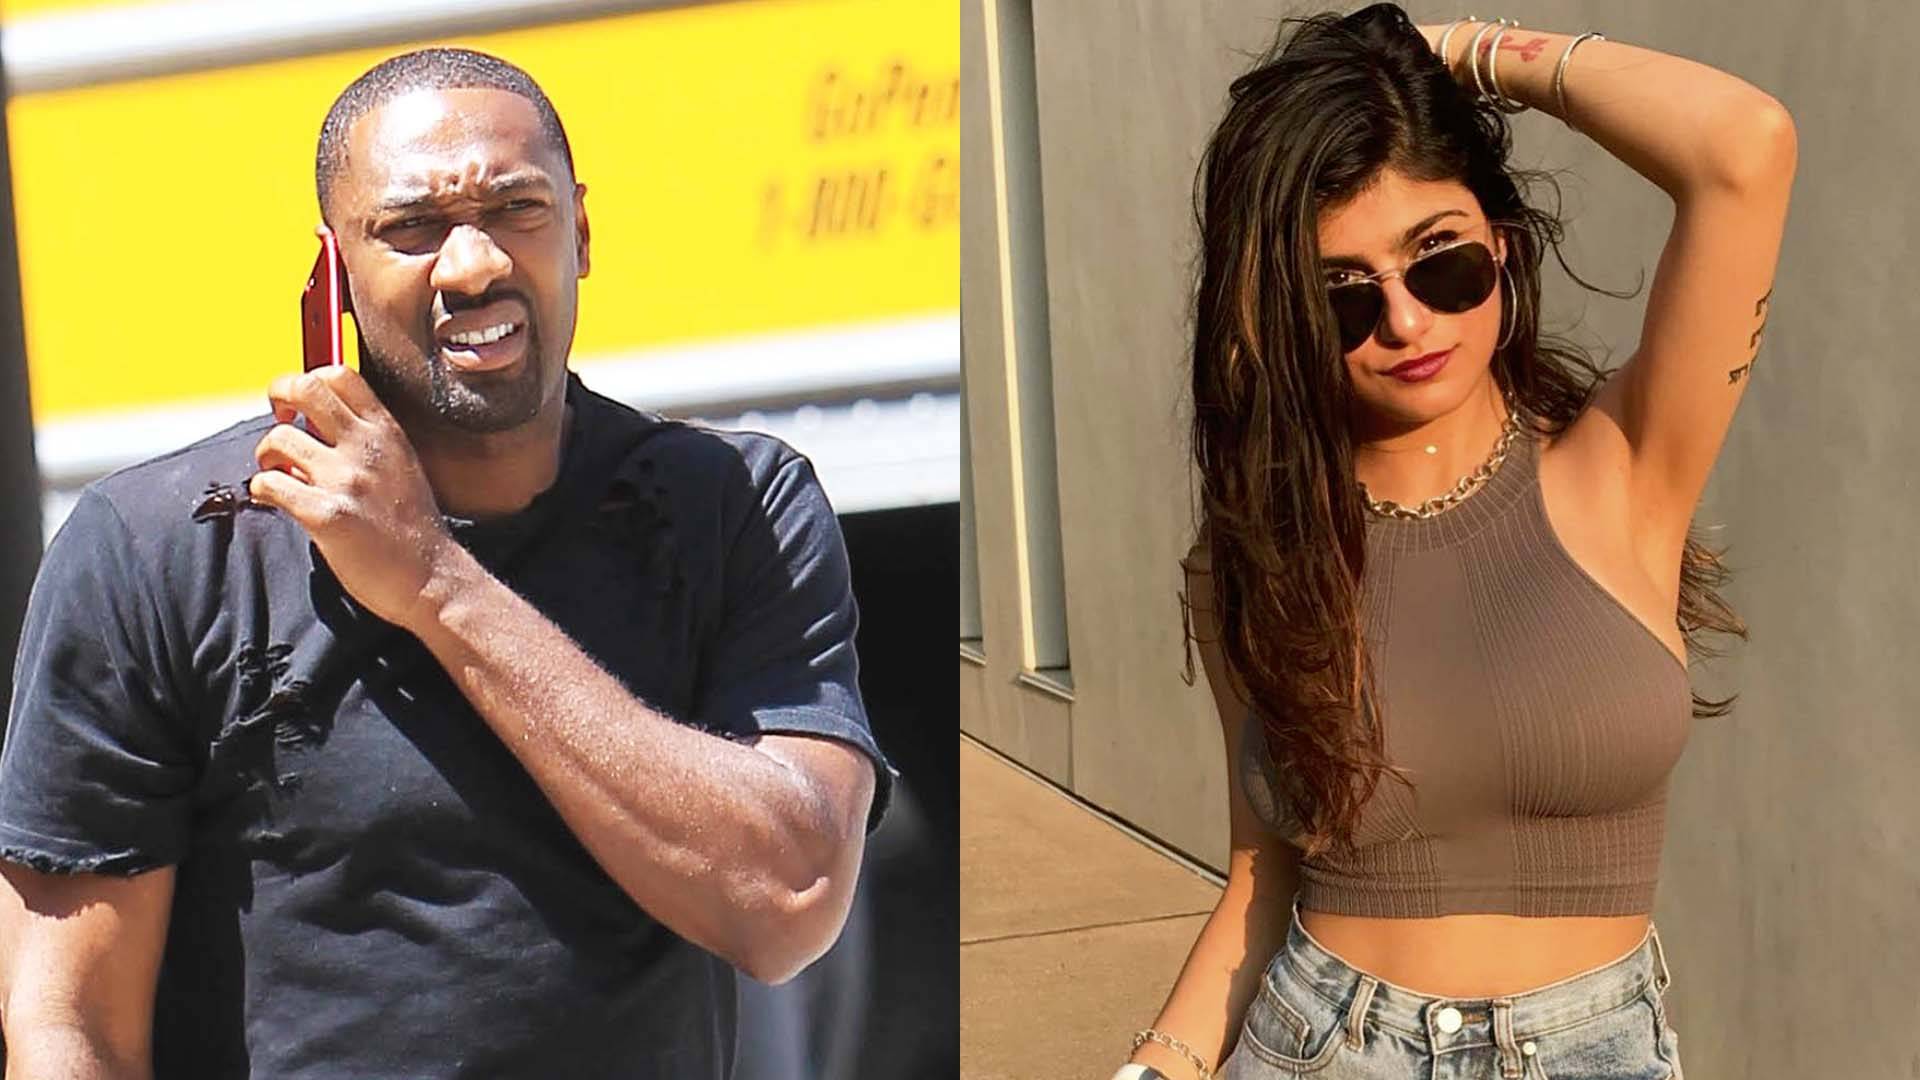 Ponrstar Refef Hd - Gilbert Arenas And Porn Star Mia Khalifa Are About To Launch A New Sports  Talk Show Called 'Out Of Bounds' | News | BET